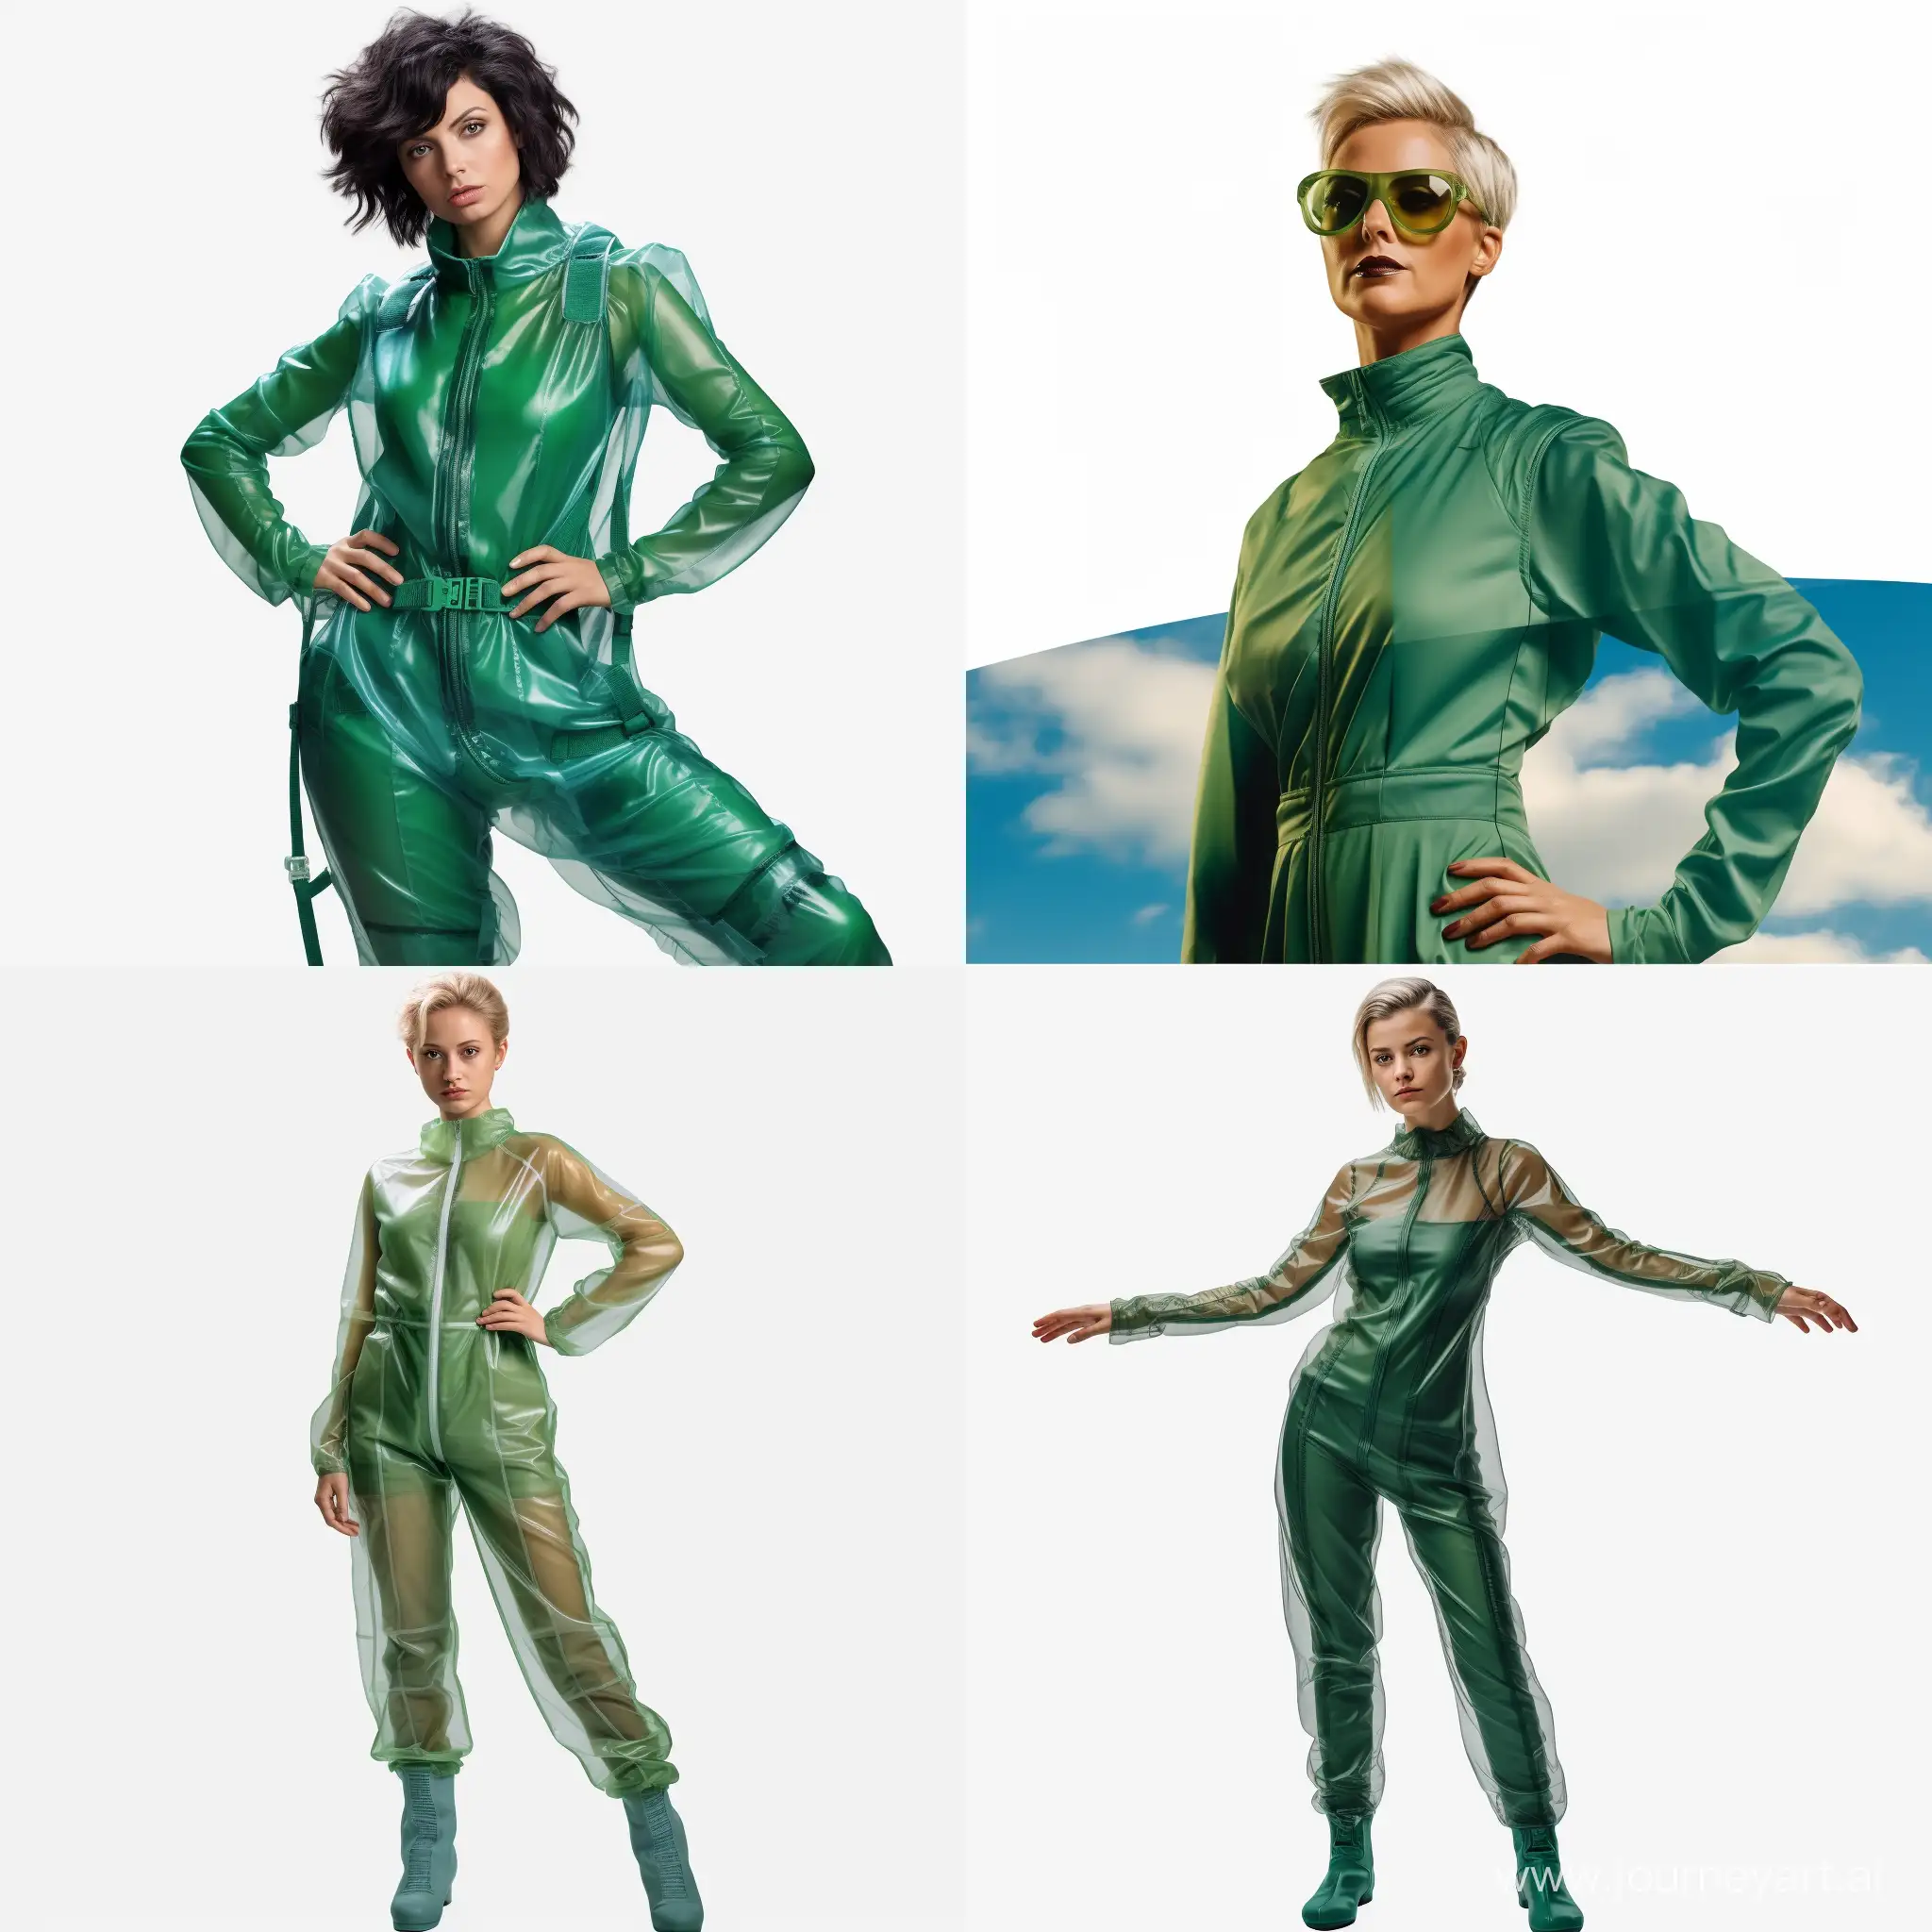 Futuristic-Woman-Agronomist-in-Green-Jumpsuit-on-Transparent-Background